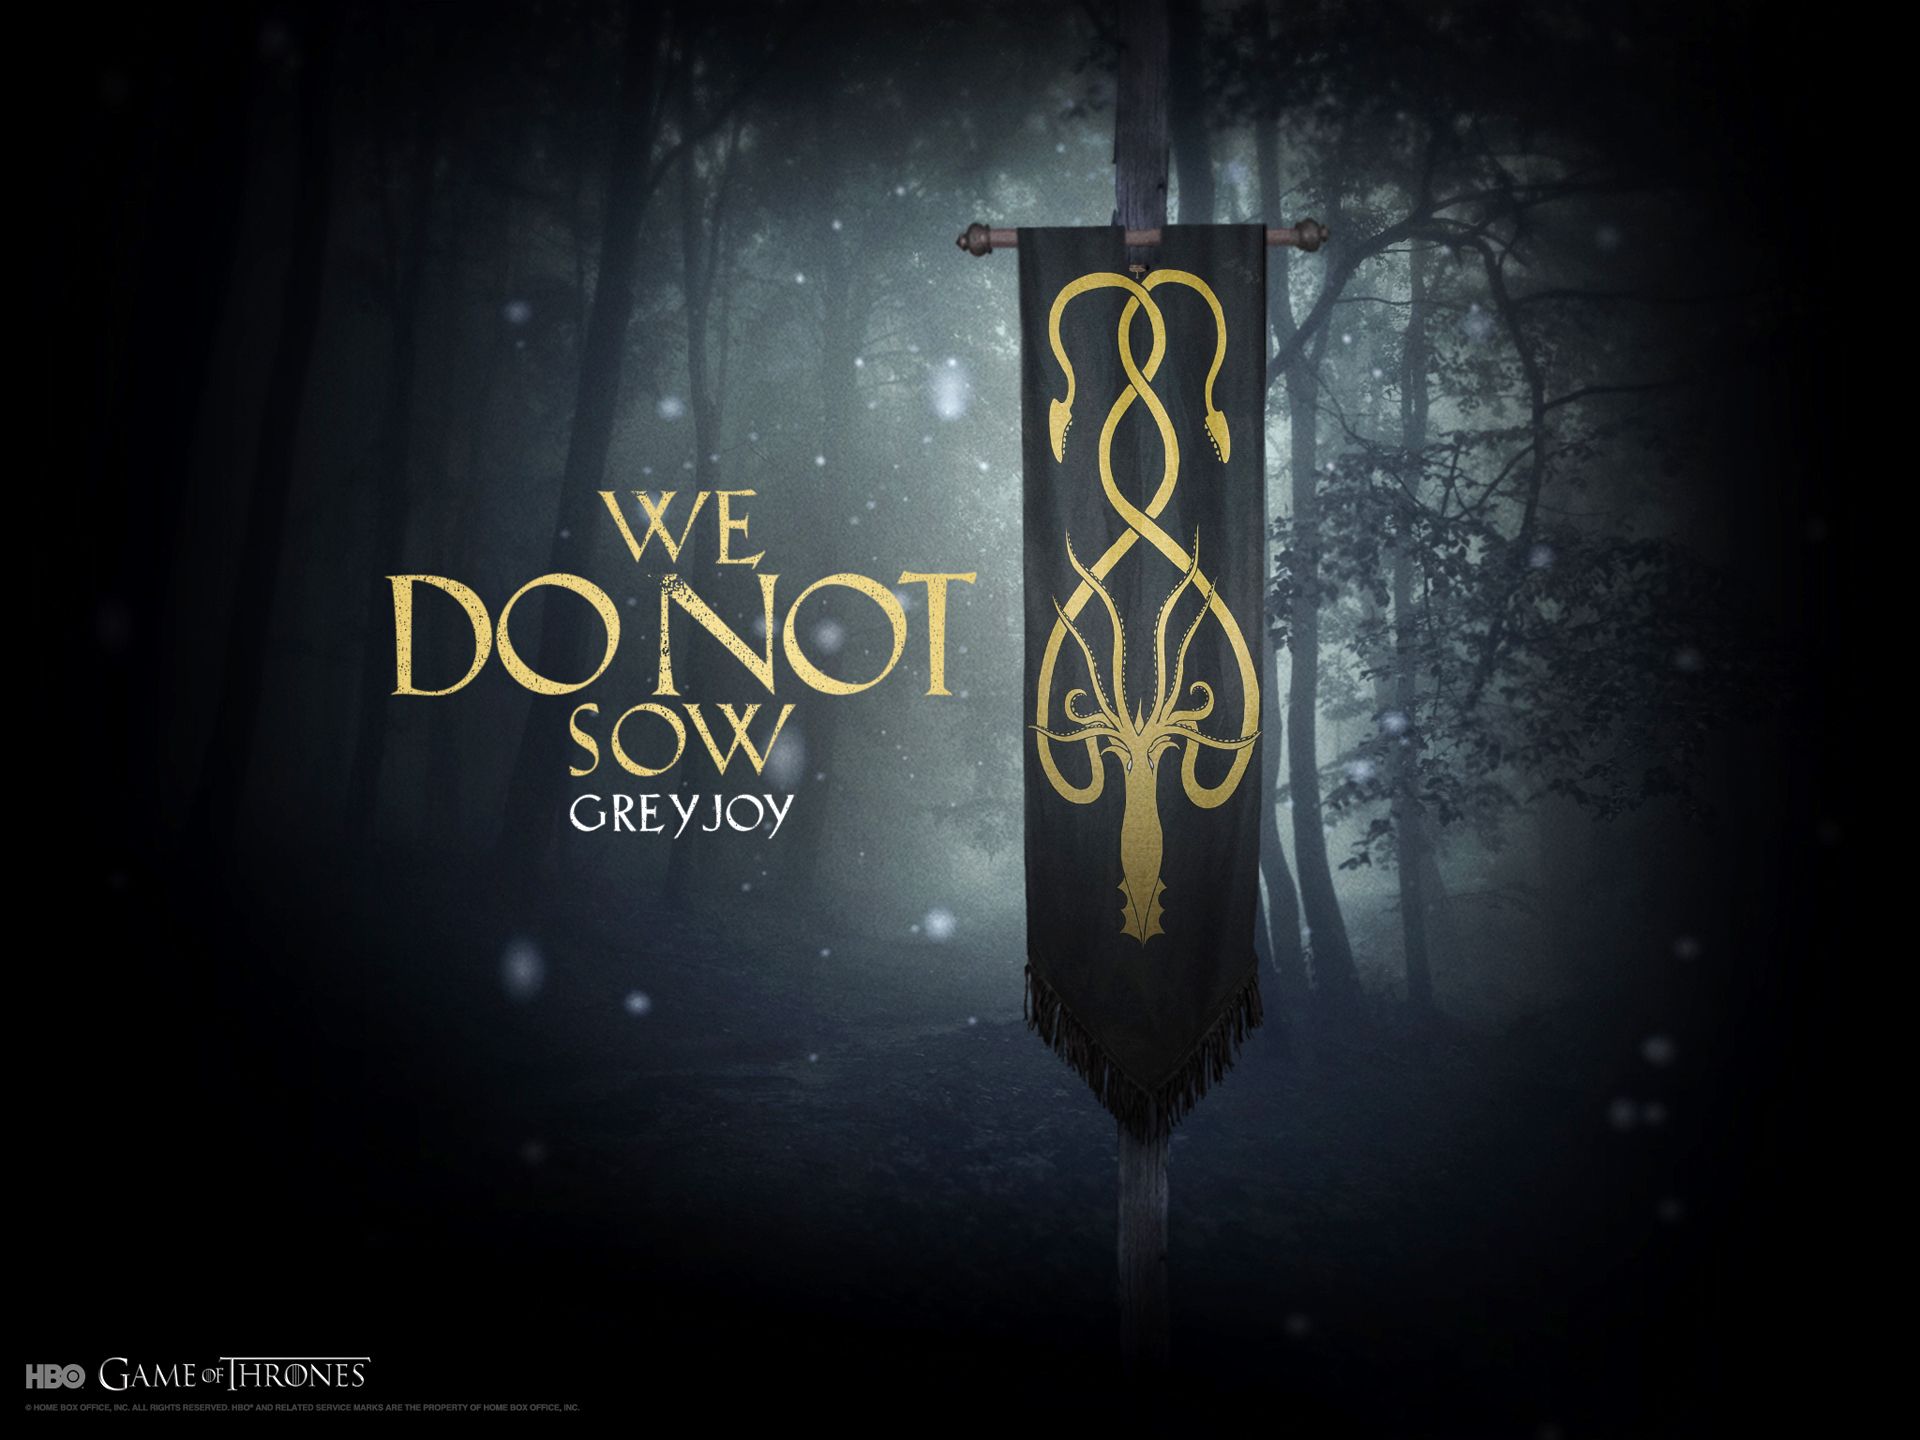 Game of thrones Wallpaper